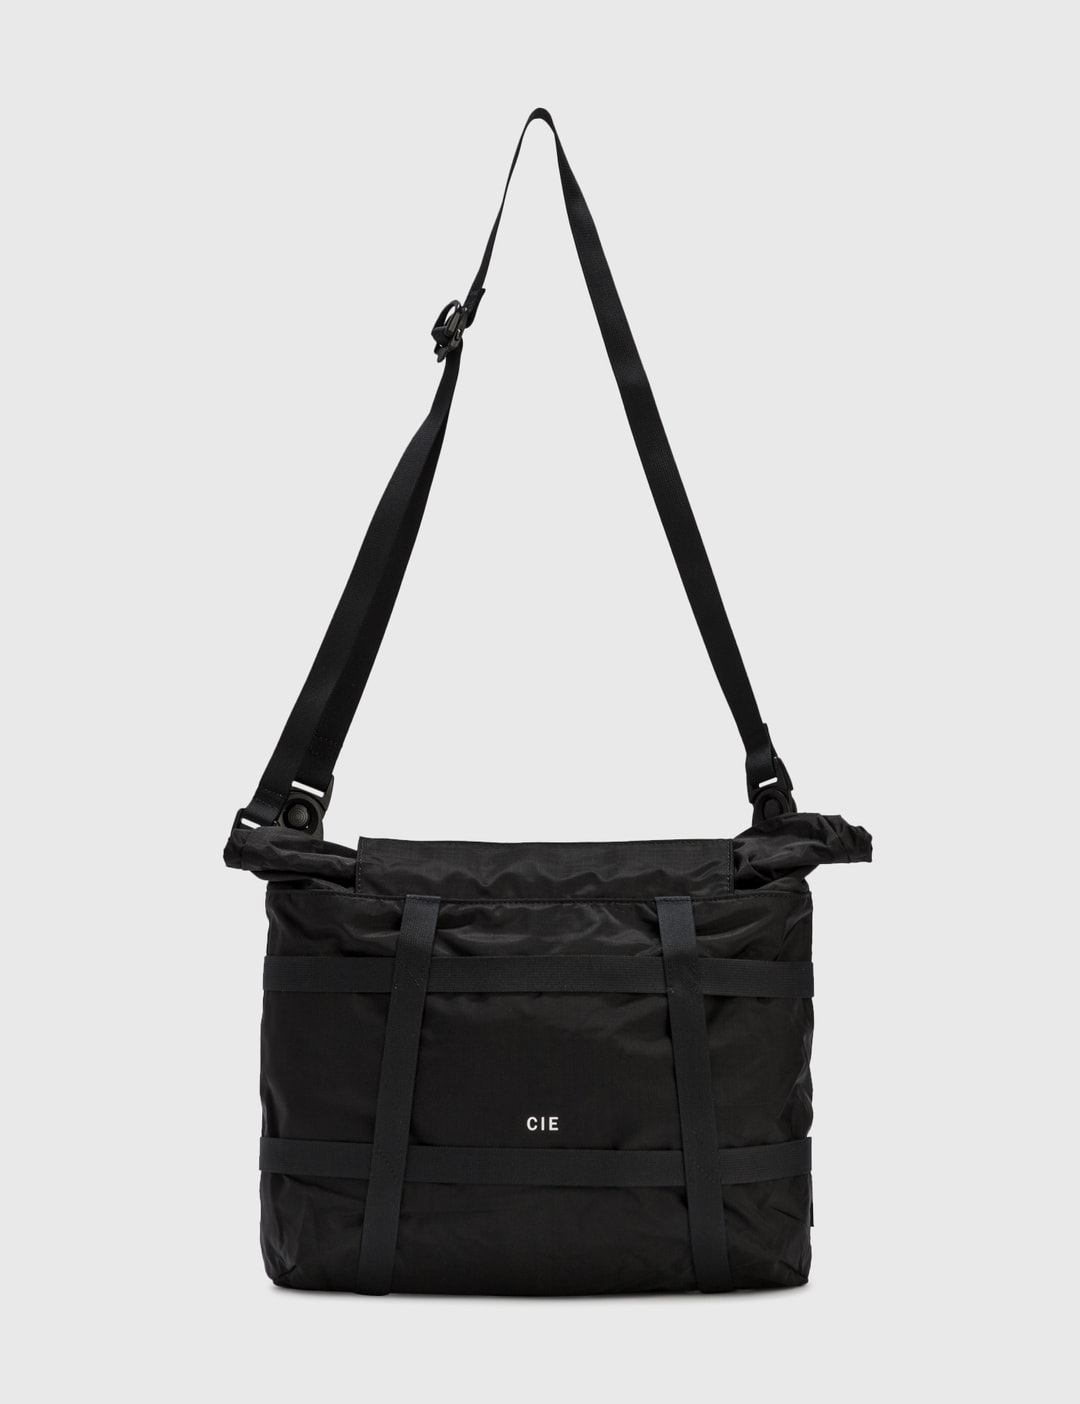 CIE - Grid Shoulder Bag 01 | HBX - Globally Curated Fashion and ...